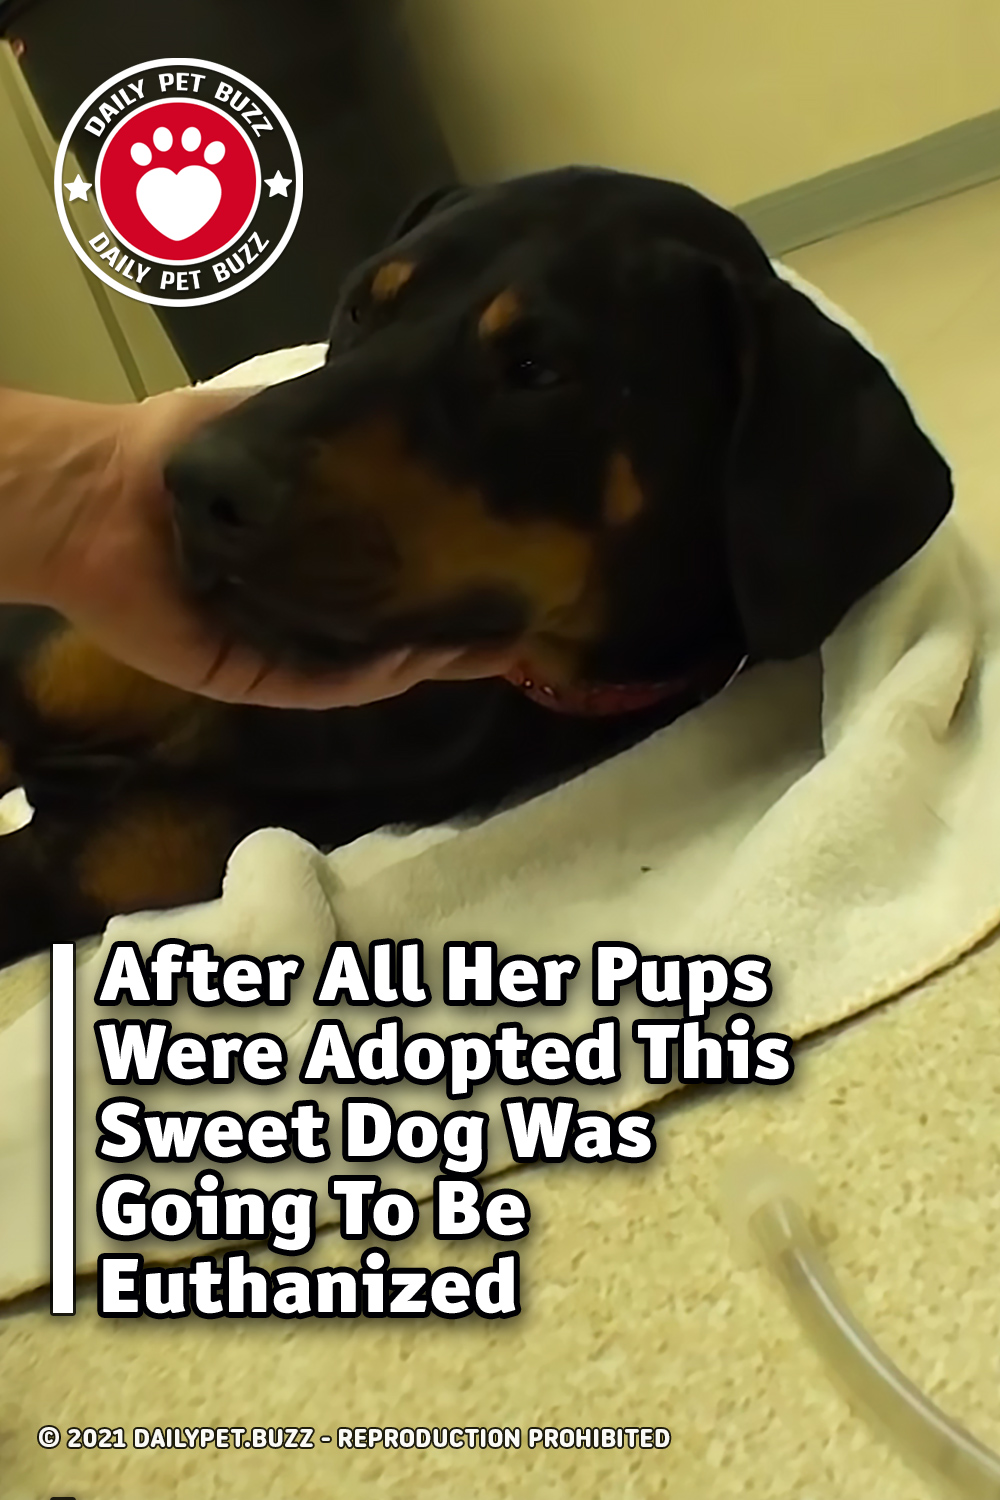 After All Her Pups Were Adopted This Sweet Dog Was Going To Be Euthanized